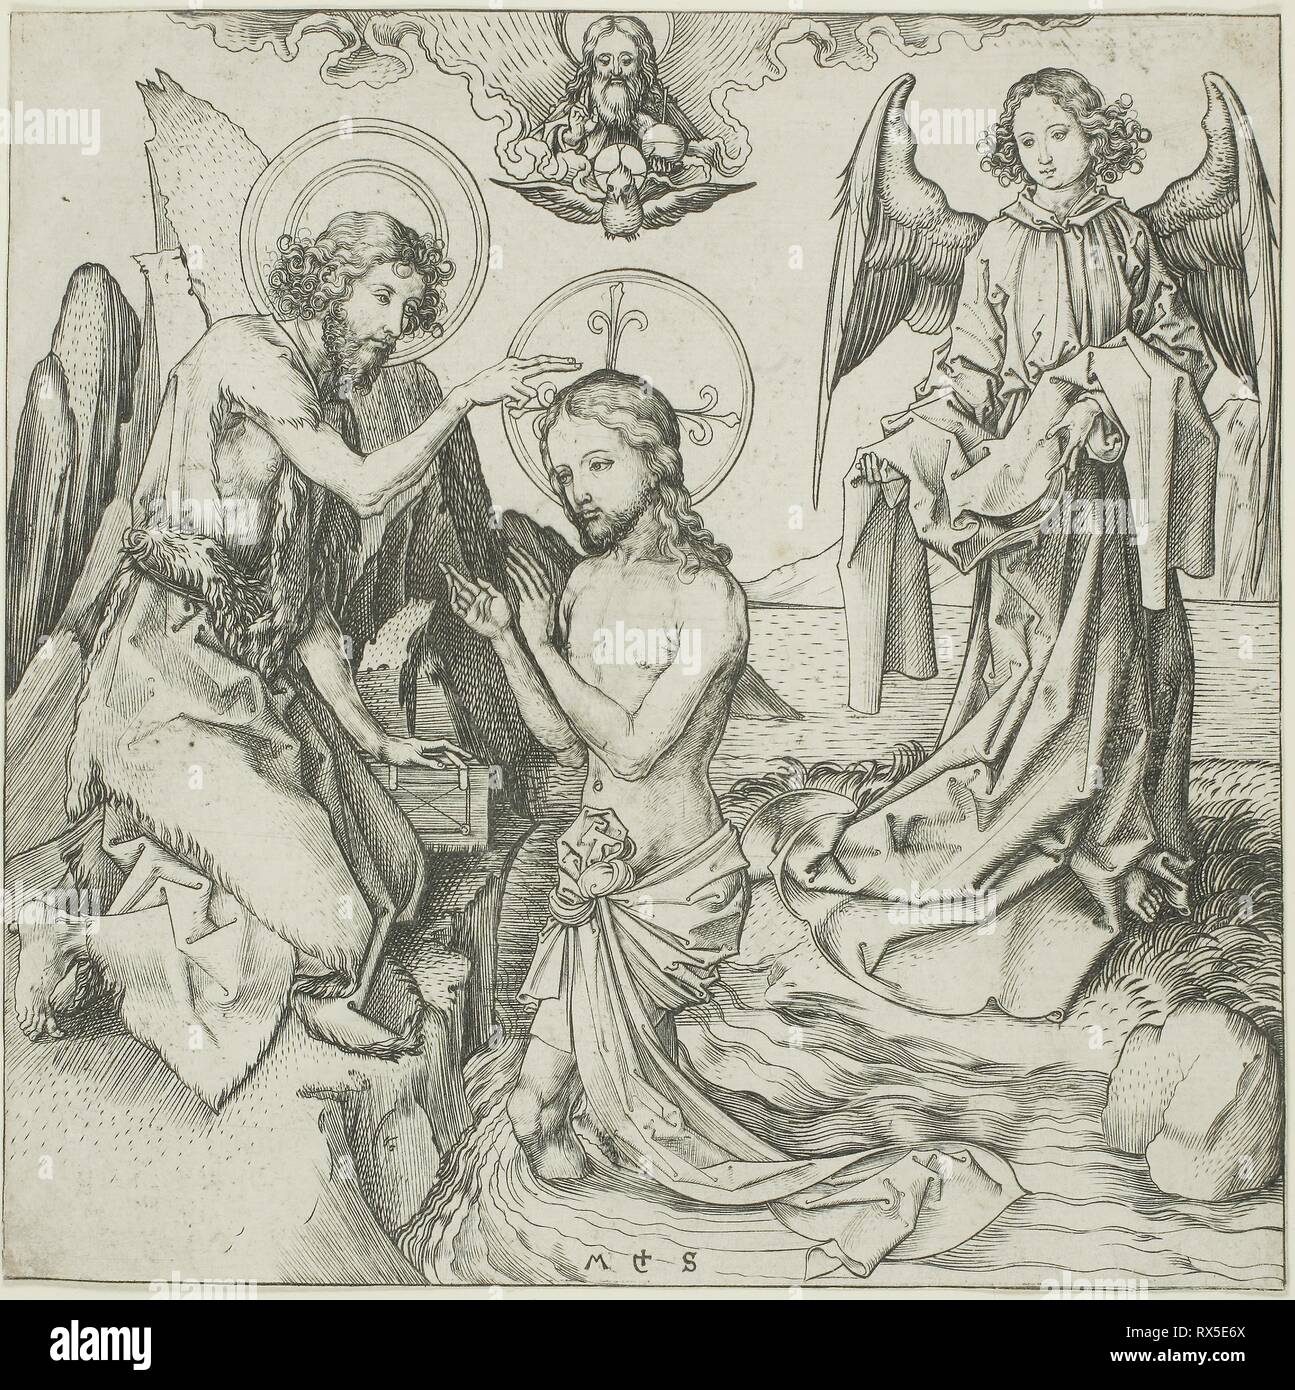 The Baptism of Christ. Martin Schongauer; German, c. 1450-1491. Date: 1475-1495. Dimensions: 156 × 158 mm (plate/sheet). Engraving in black on ivory laid paper. Origin: Germany. Museum: The Chicago Art Institute. Stock Photo